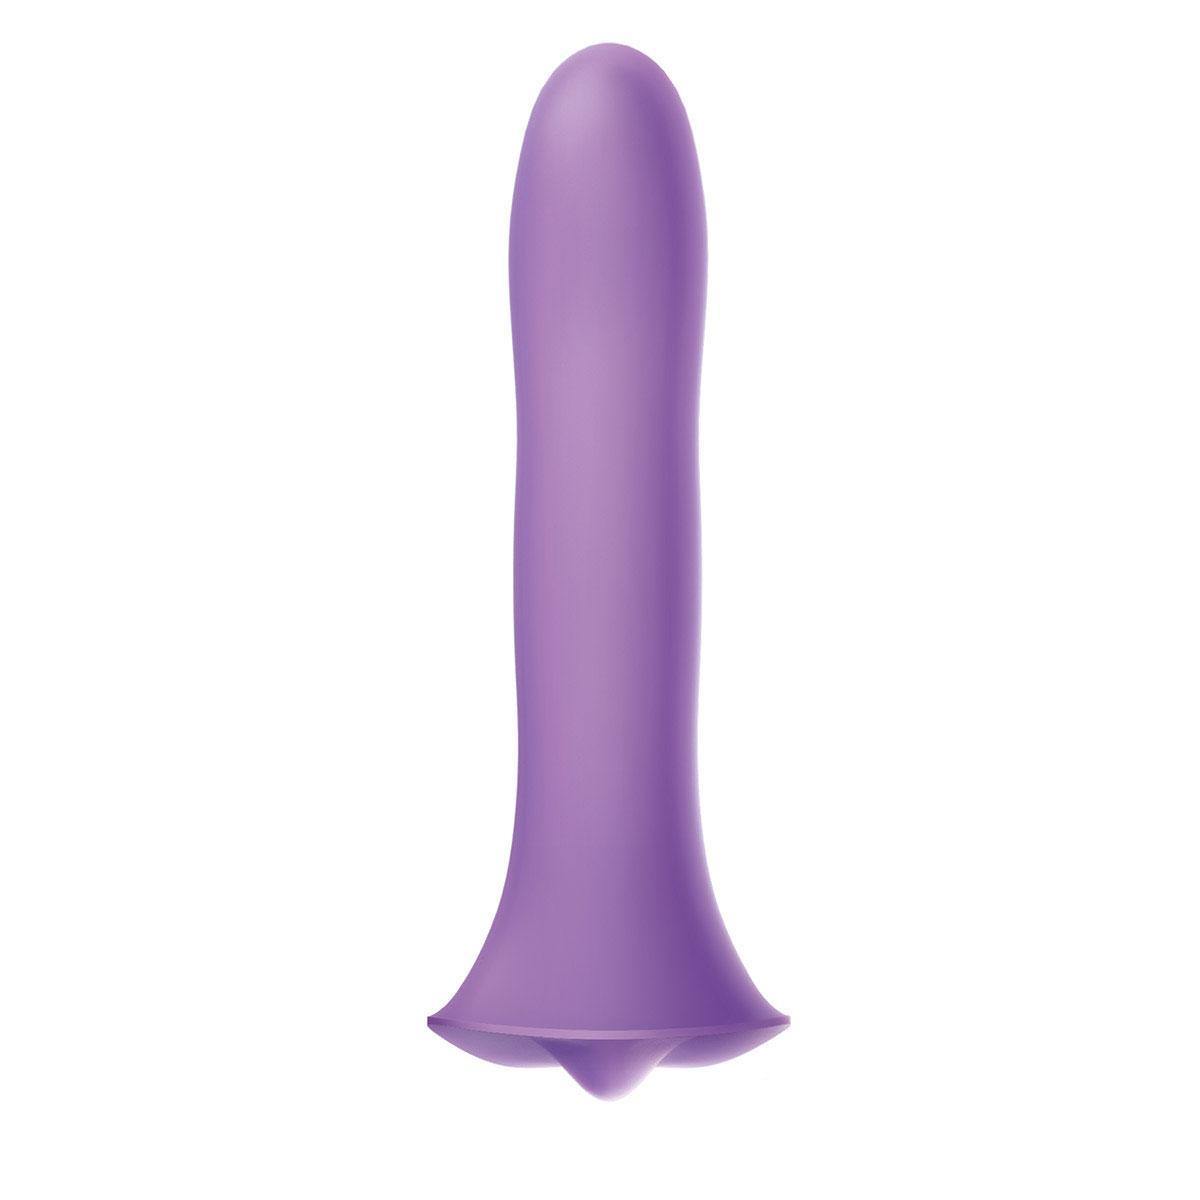 Wet for Her Fusion Dil (L) - Buy At Luxury Toy X - Free 3-Day Shipping